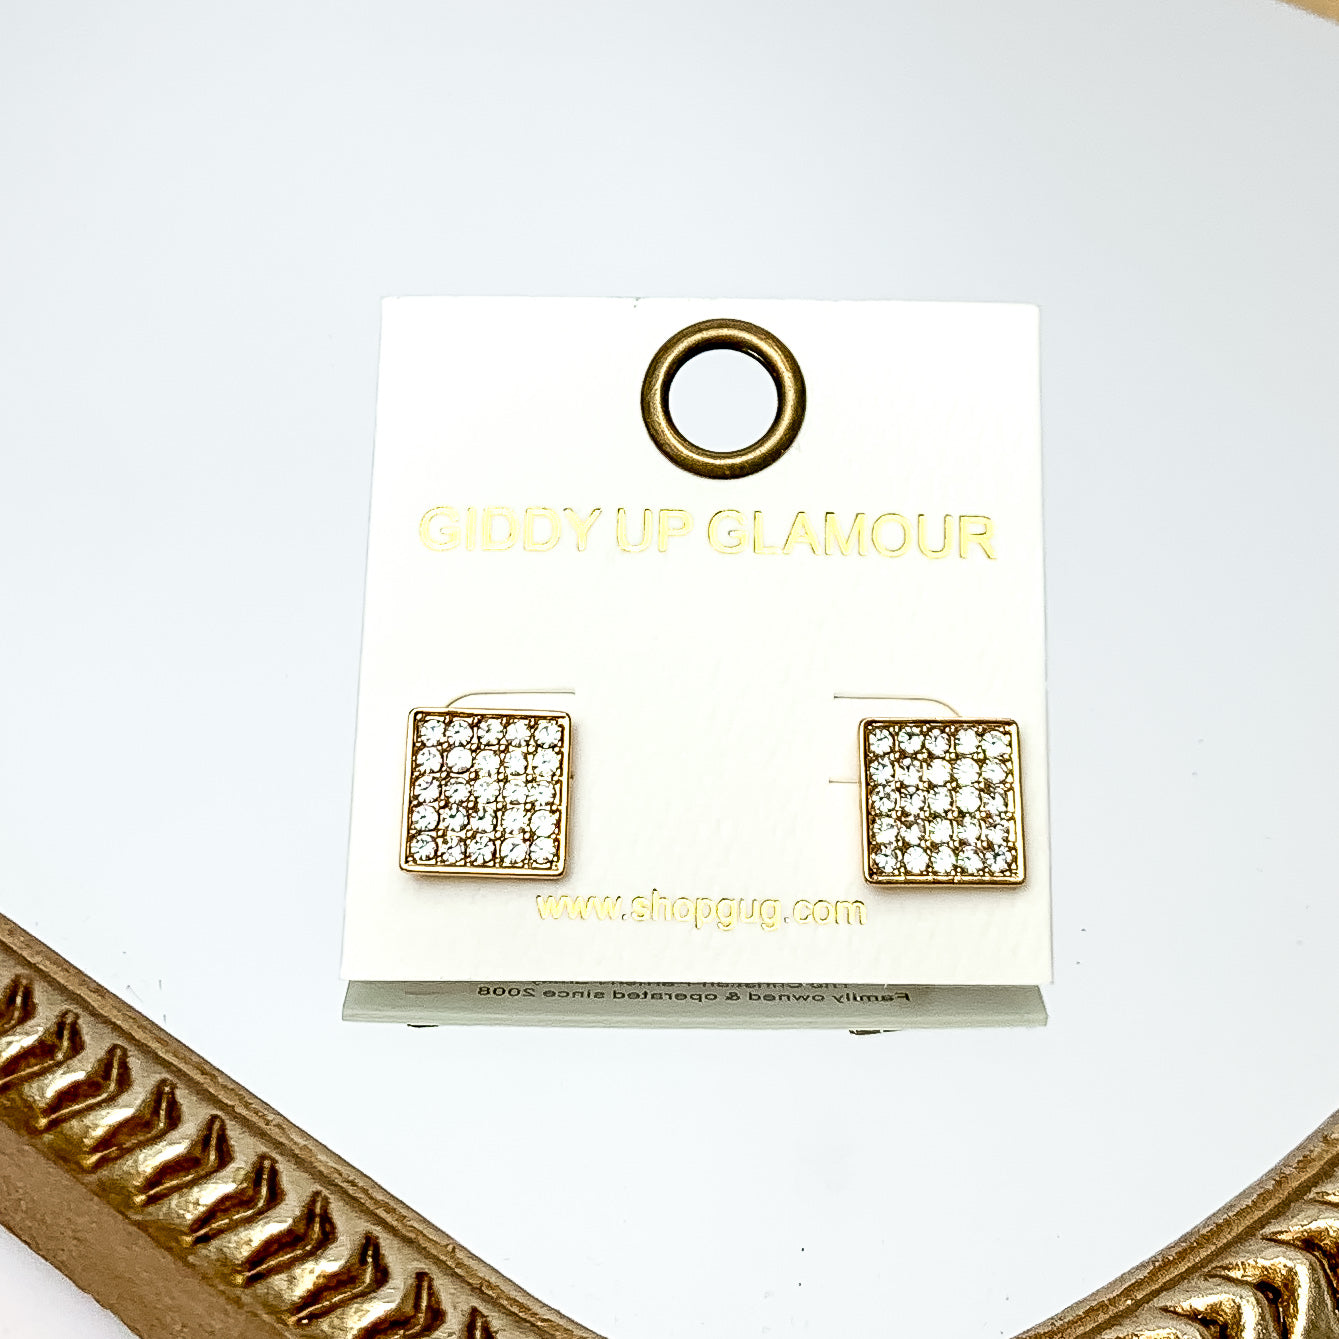 Square Clear Crystal Stud Earrings in Gold Tone. These earrings are pictured on a white background with a gold frame around.